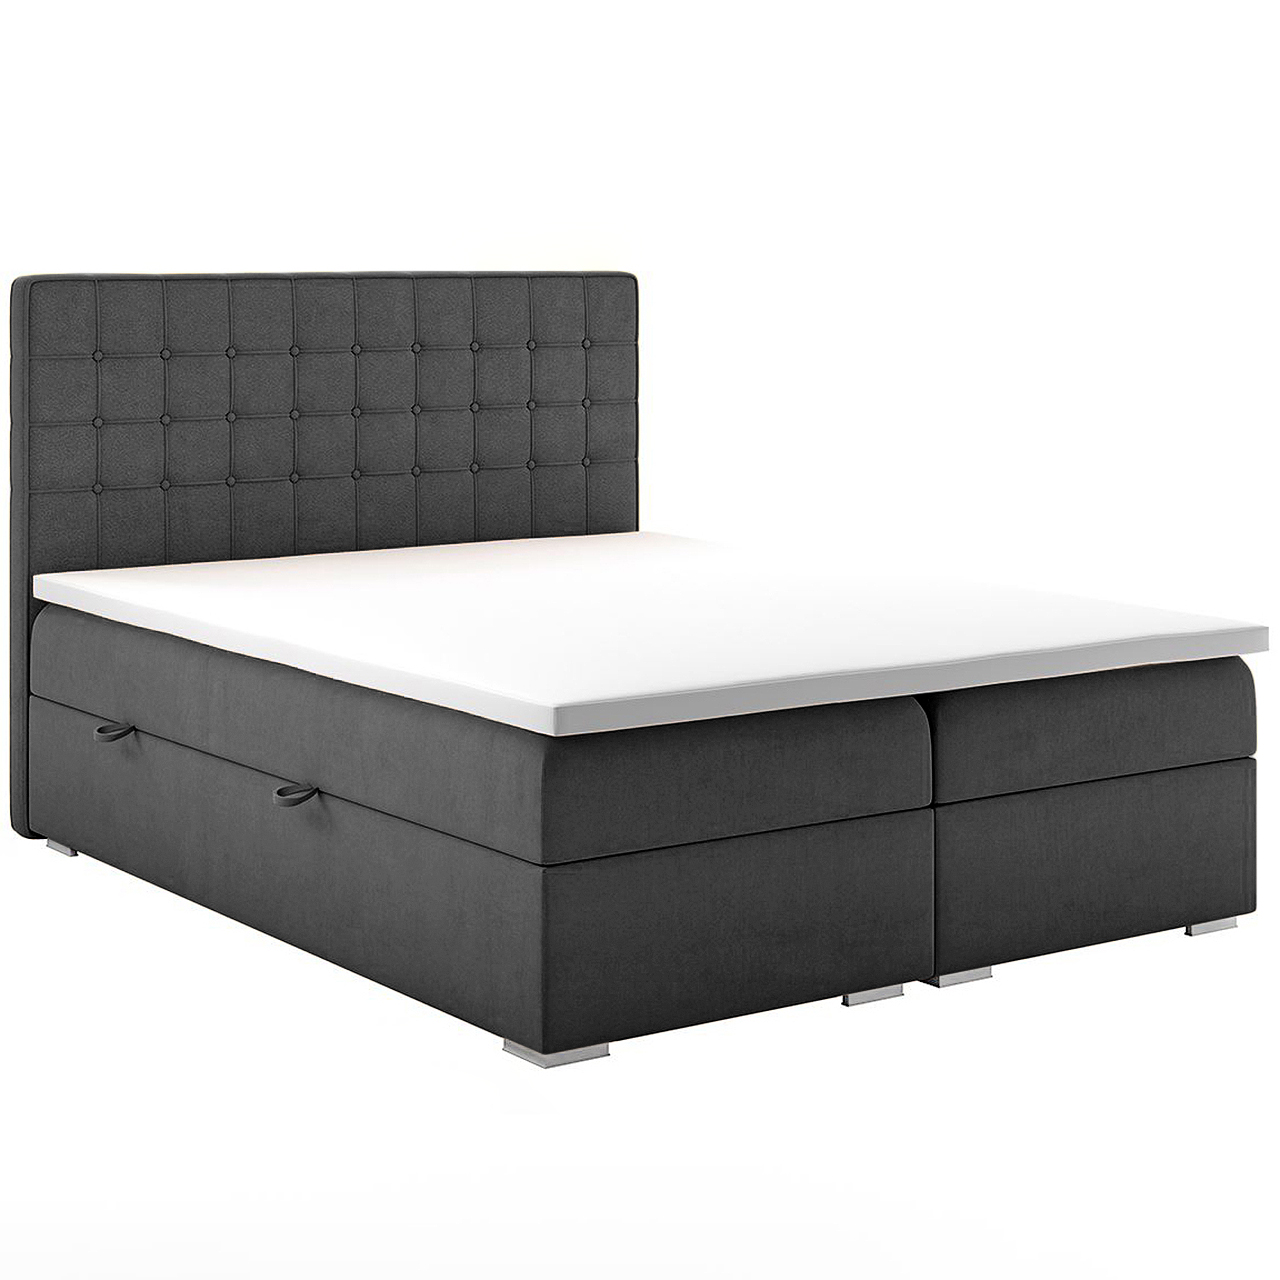 Upholstered bed CARLOS 120x200 monolith 92